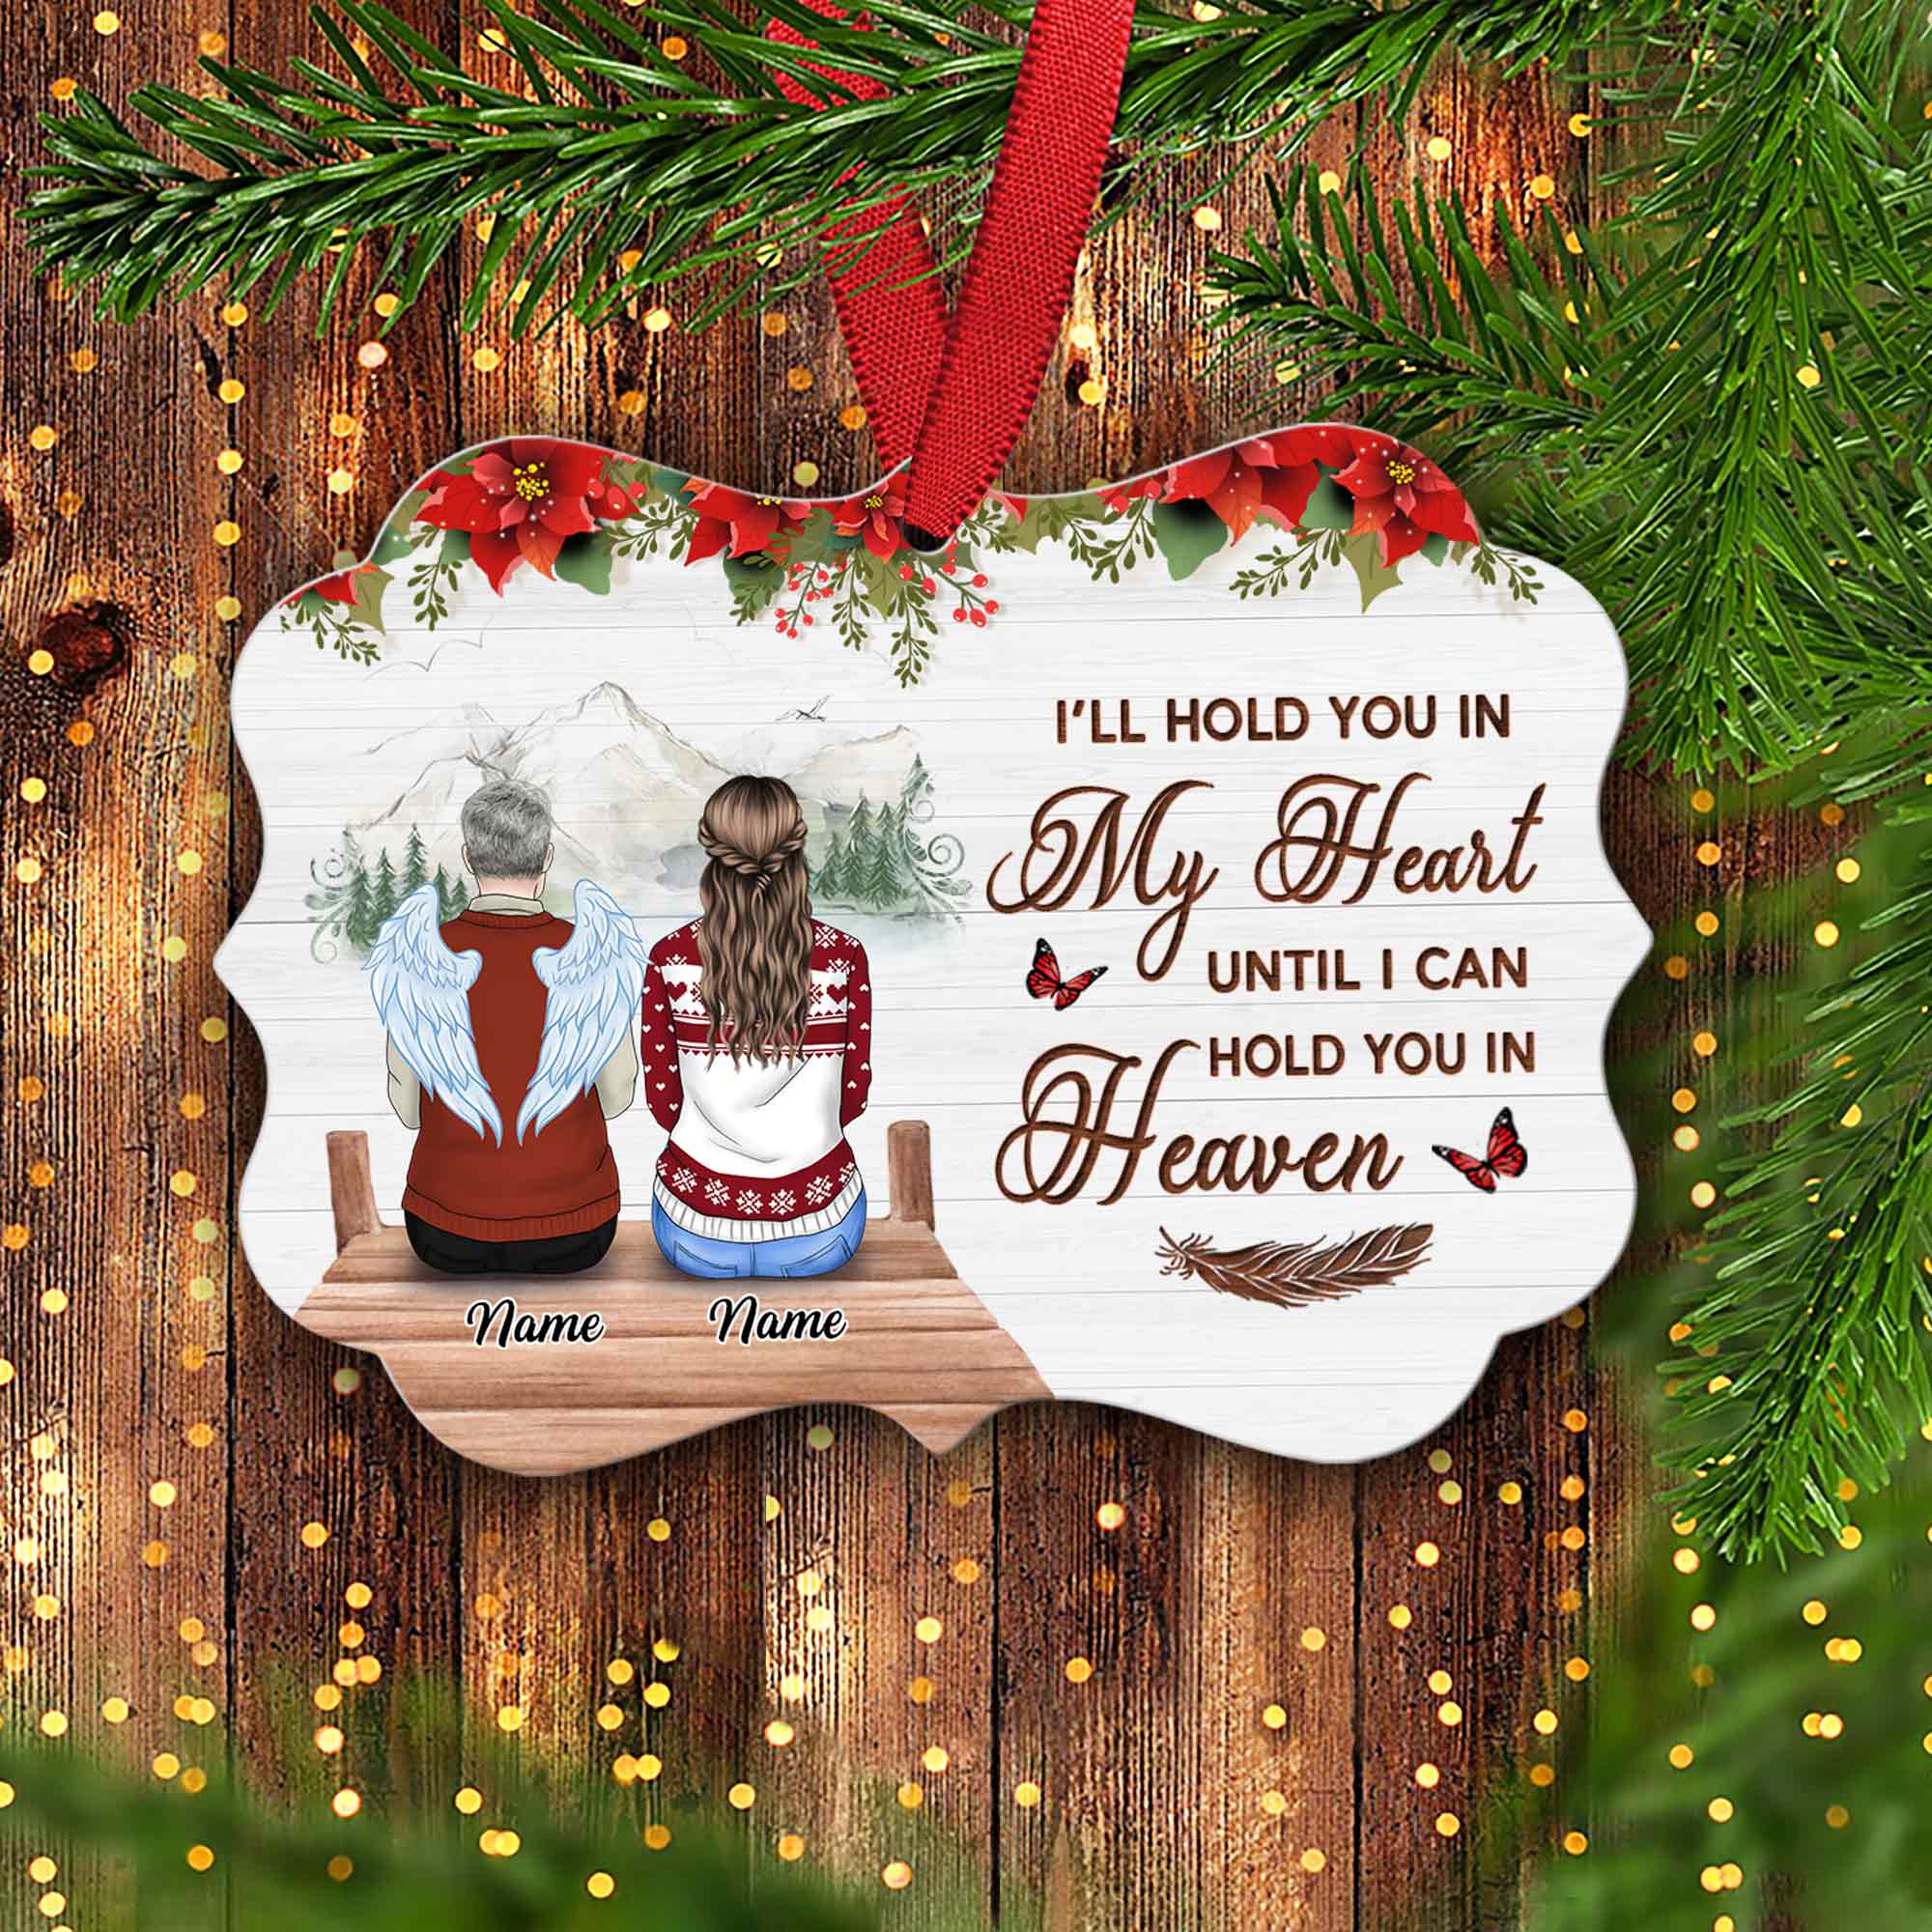 Personalized Family Member Lost Memorial Ornament I'll Hold You In My Heart Memorial Ornament Christmas In Heaven Memorial Ornament Hg98.